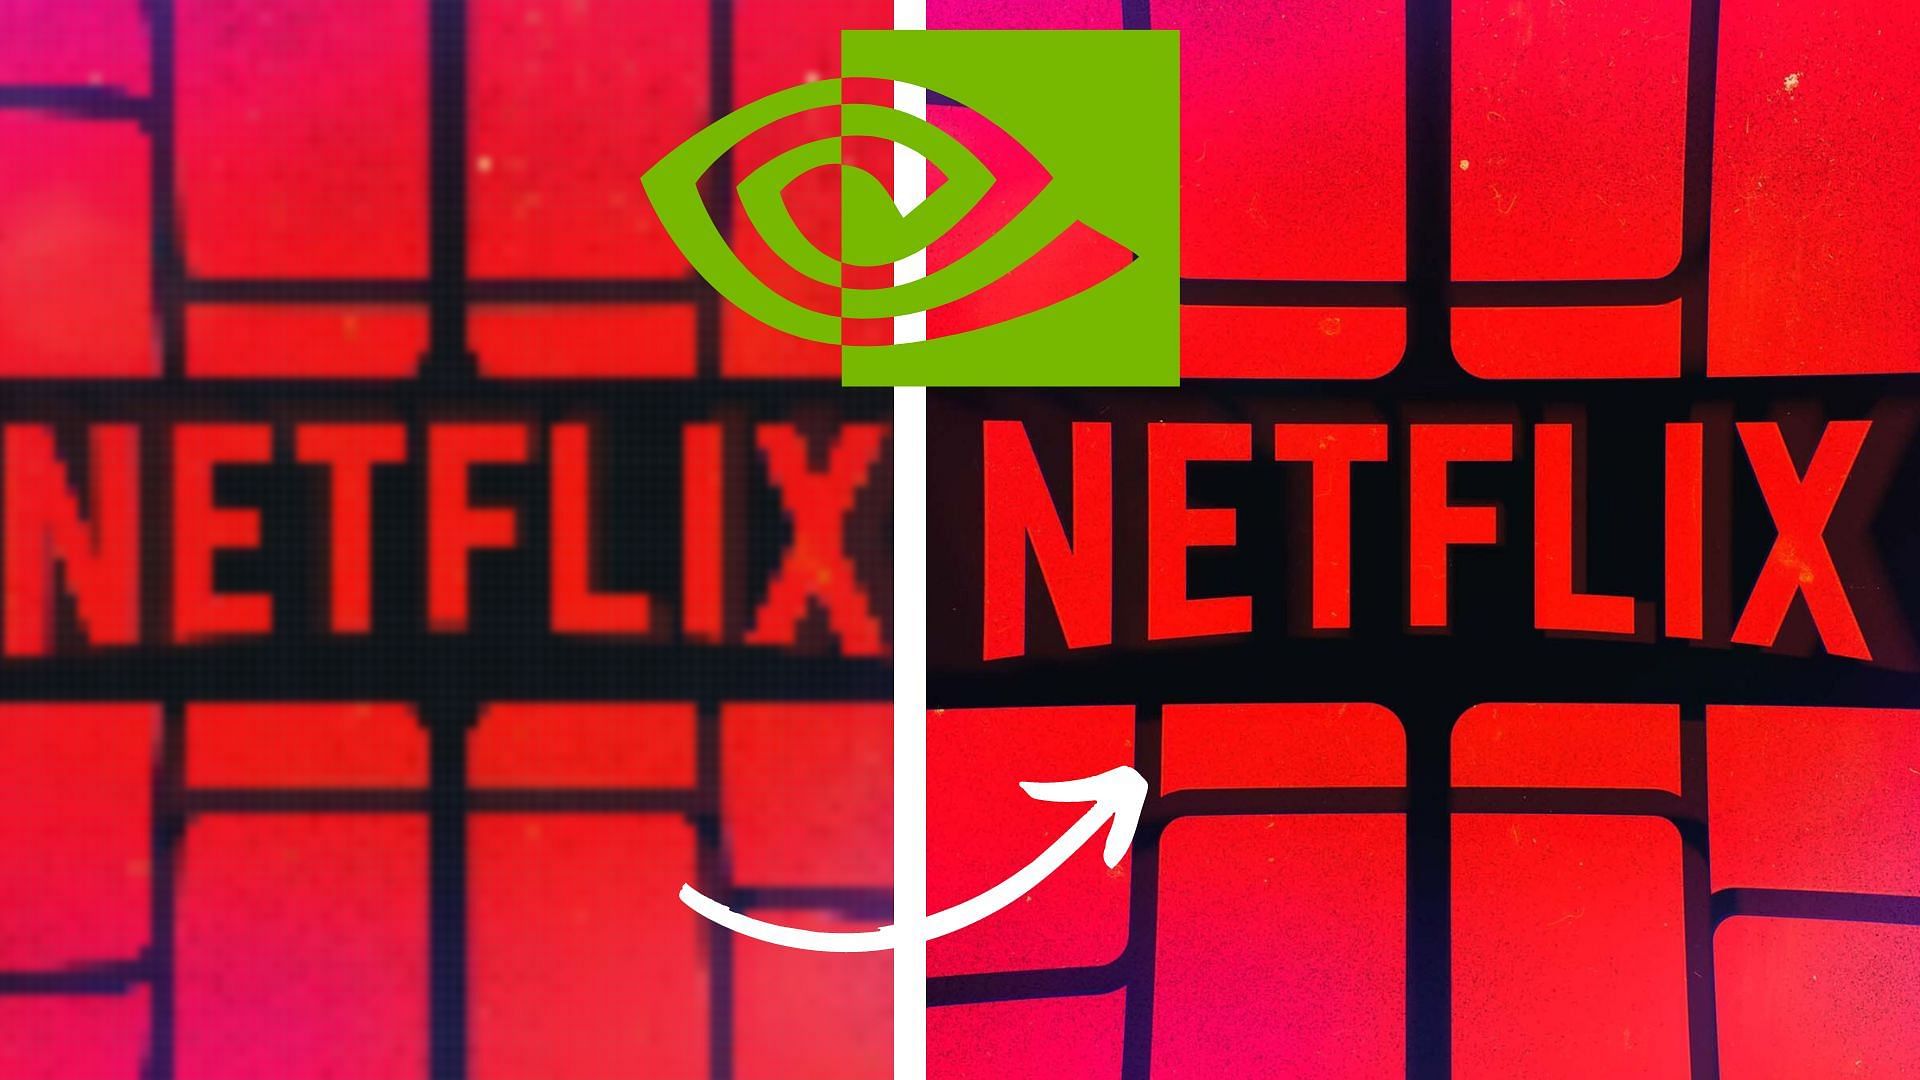 Blurred and in focus Netflix logo